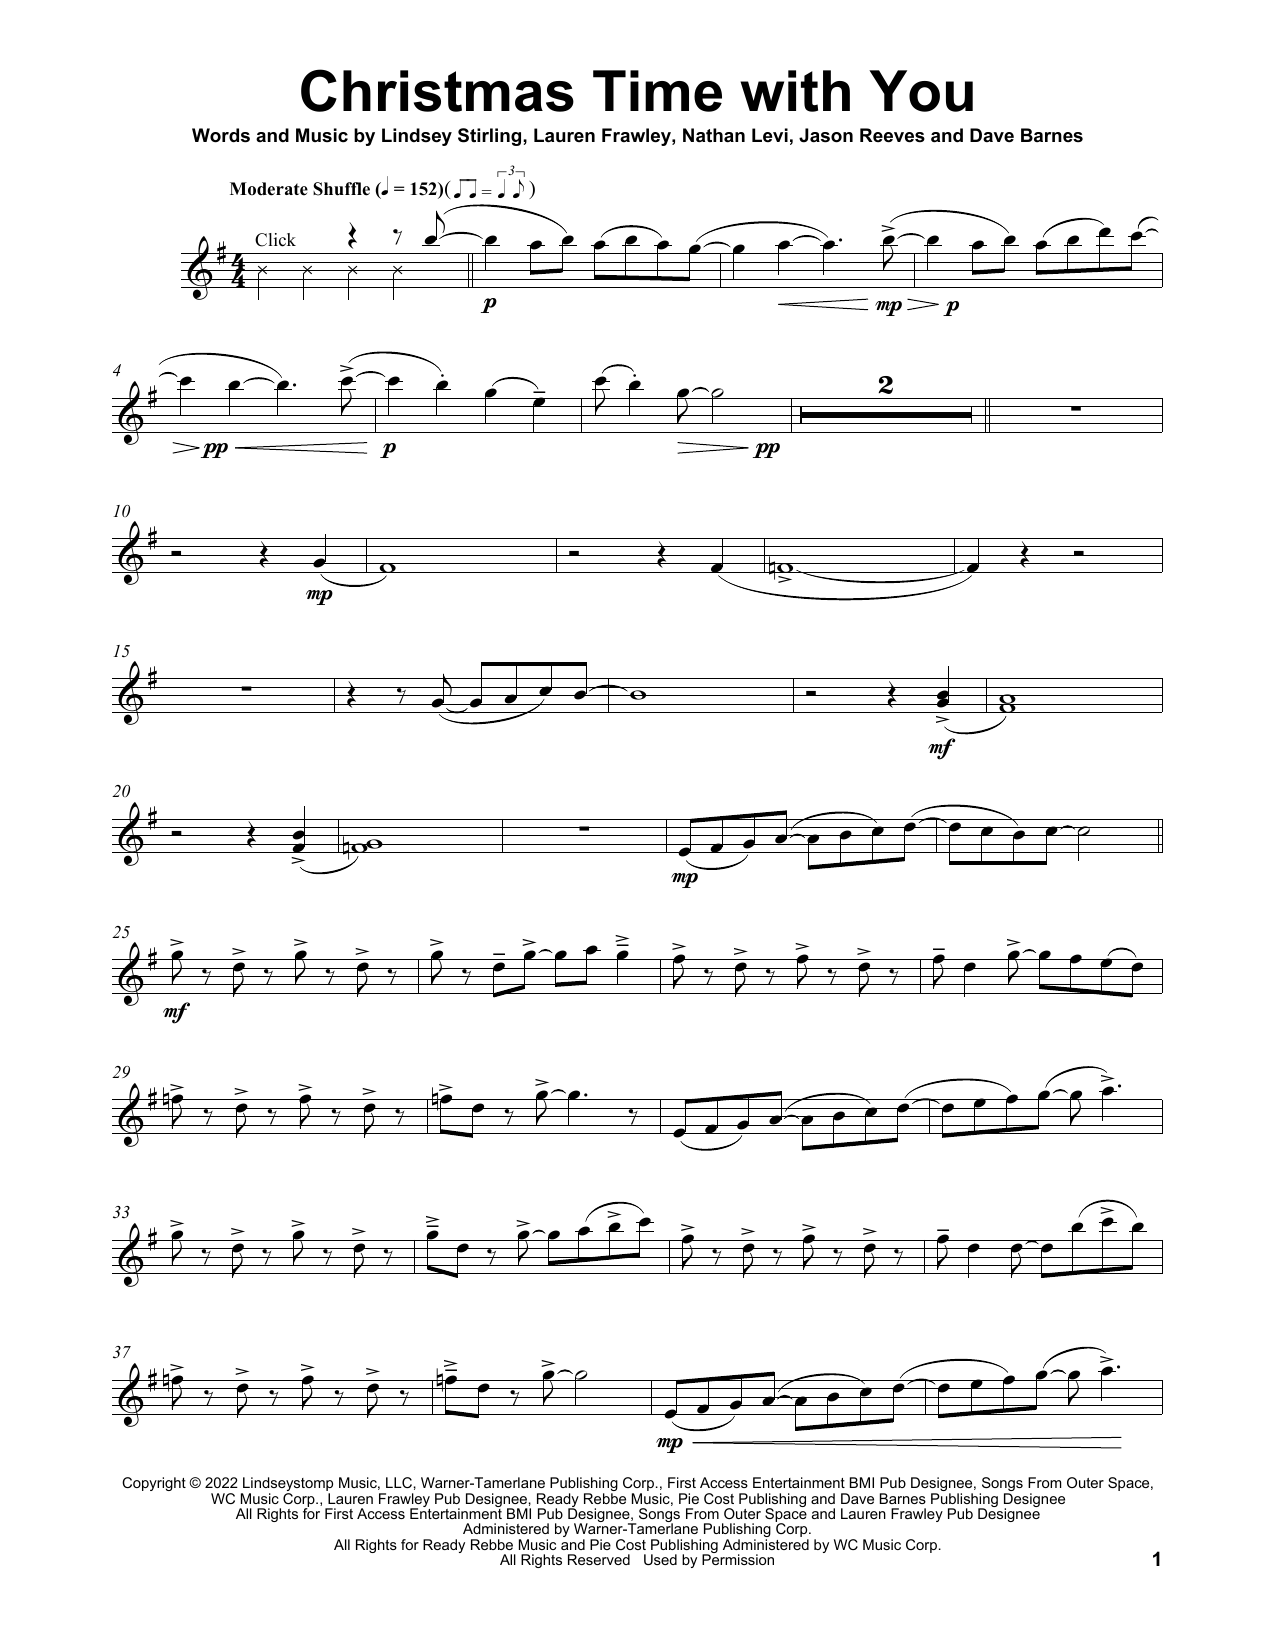 Lindsey Stirling Christmas Time With You (feat. Frawley) sheet music notes printable PDF score